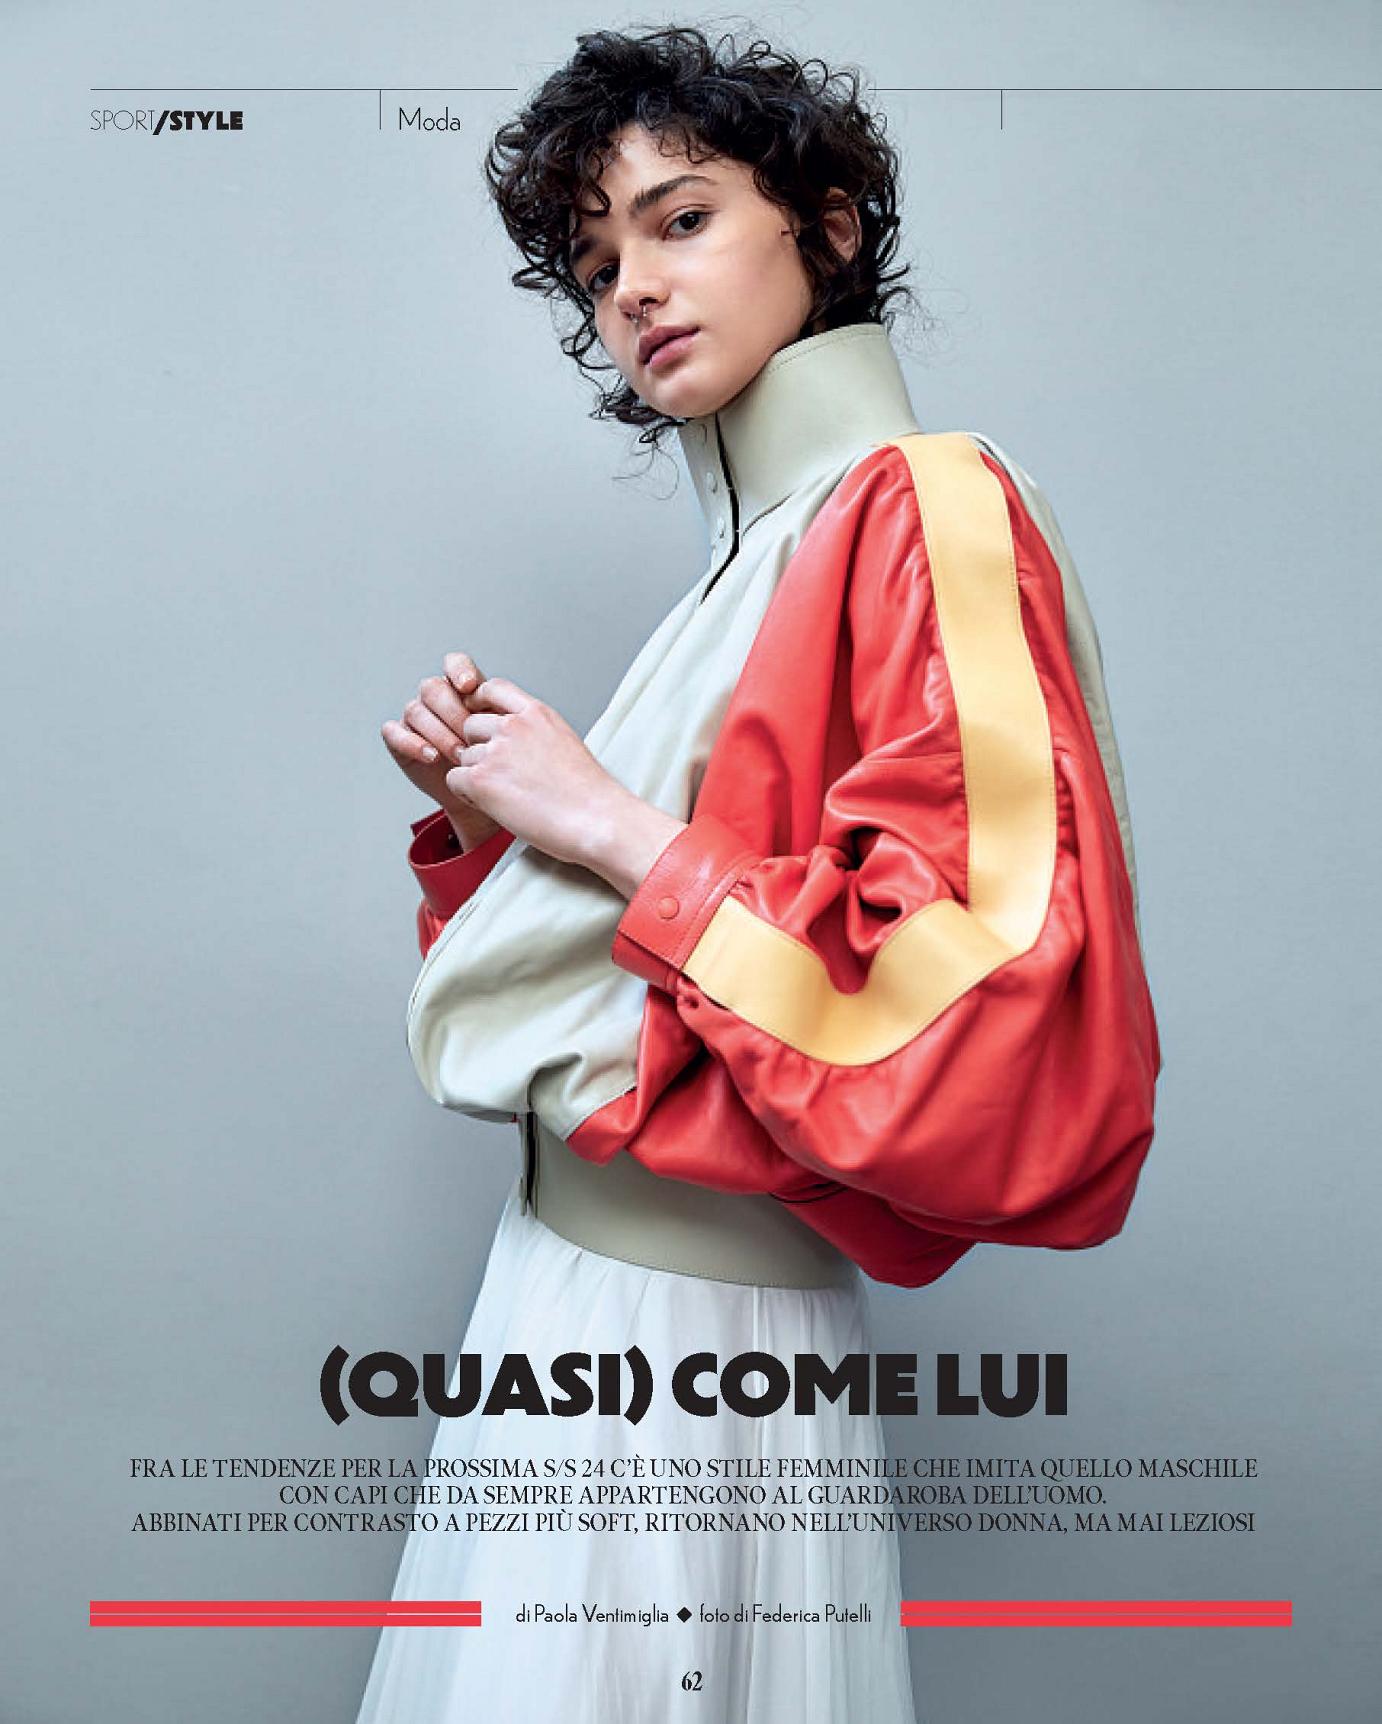 CoqCreative power by ProductionLink s.r.l. Sportweek-Quasi-Come-Lui Sportweek-Quasi-Come-Lui  Sportweek-Quasi-Come-Lui